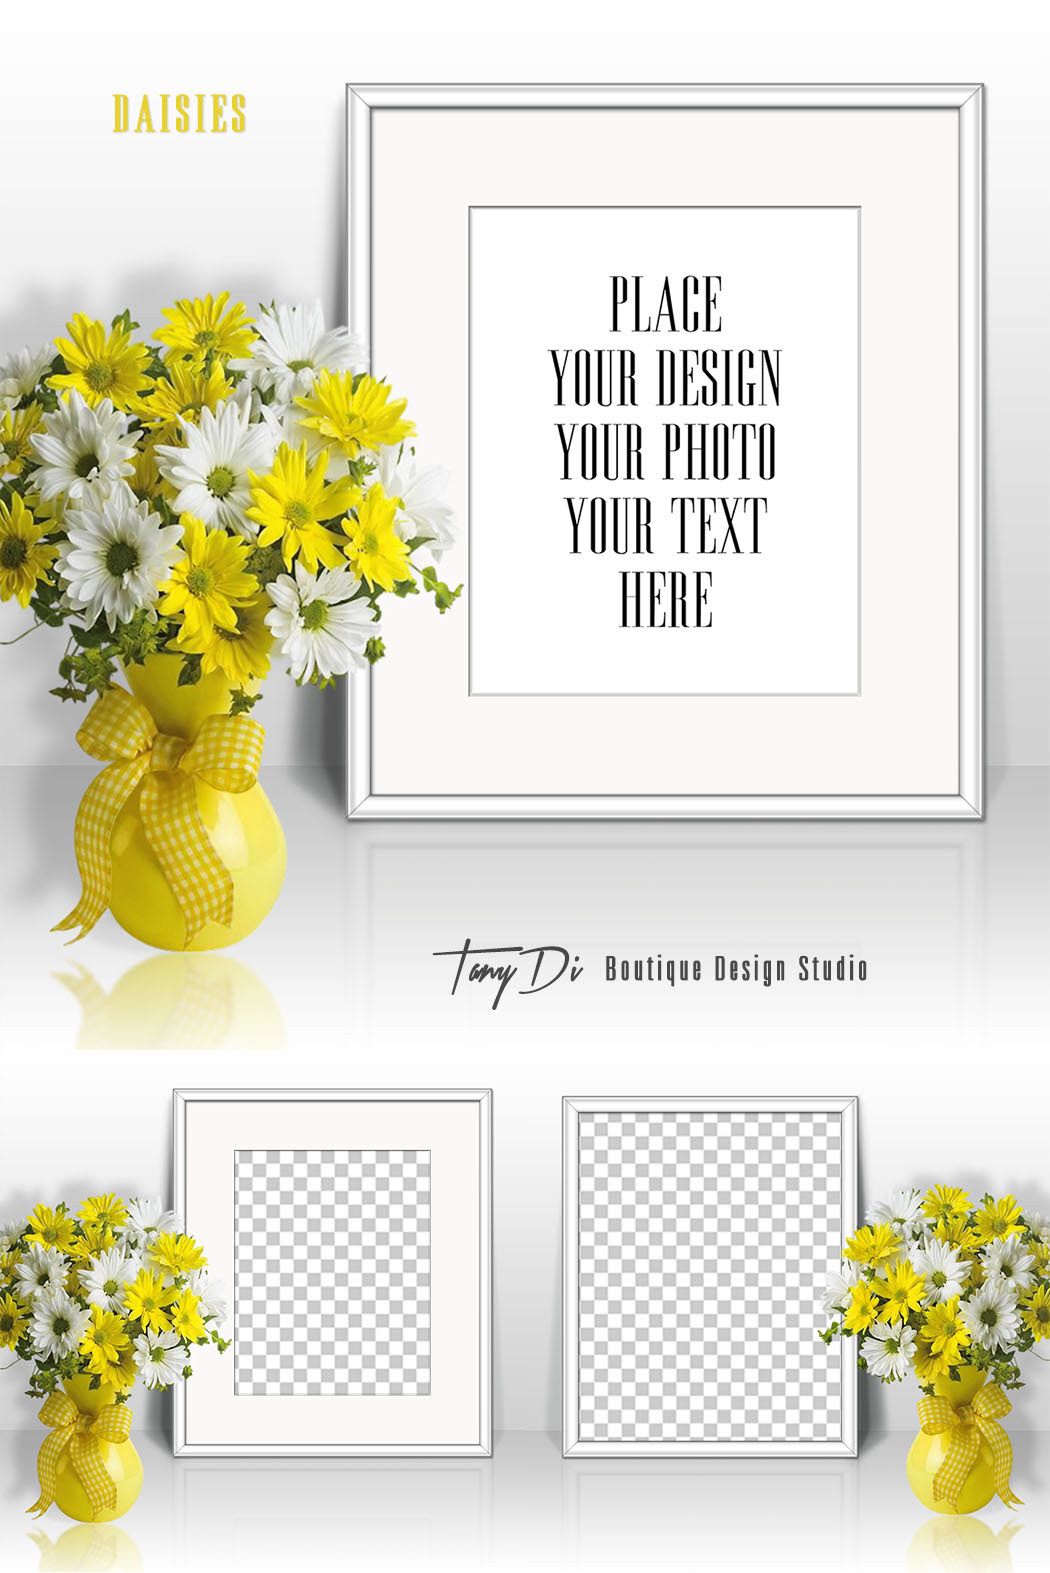 styled photography product mock-up web display professional mock-up framed 8x10 artwork empty frames portrait frame white frame png psd poster frame white & yellow